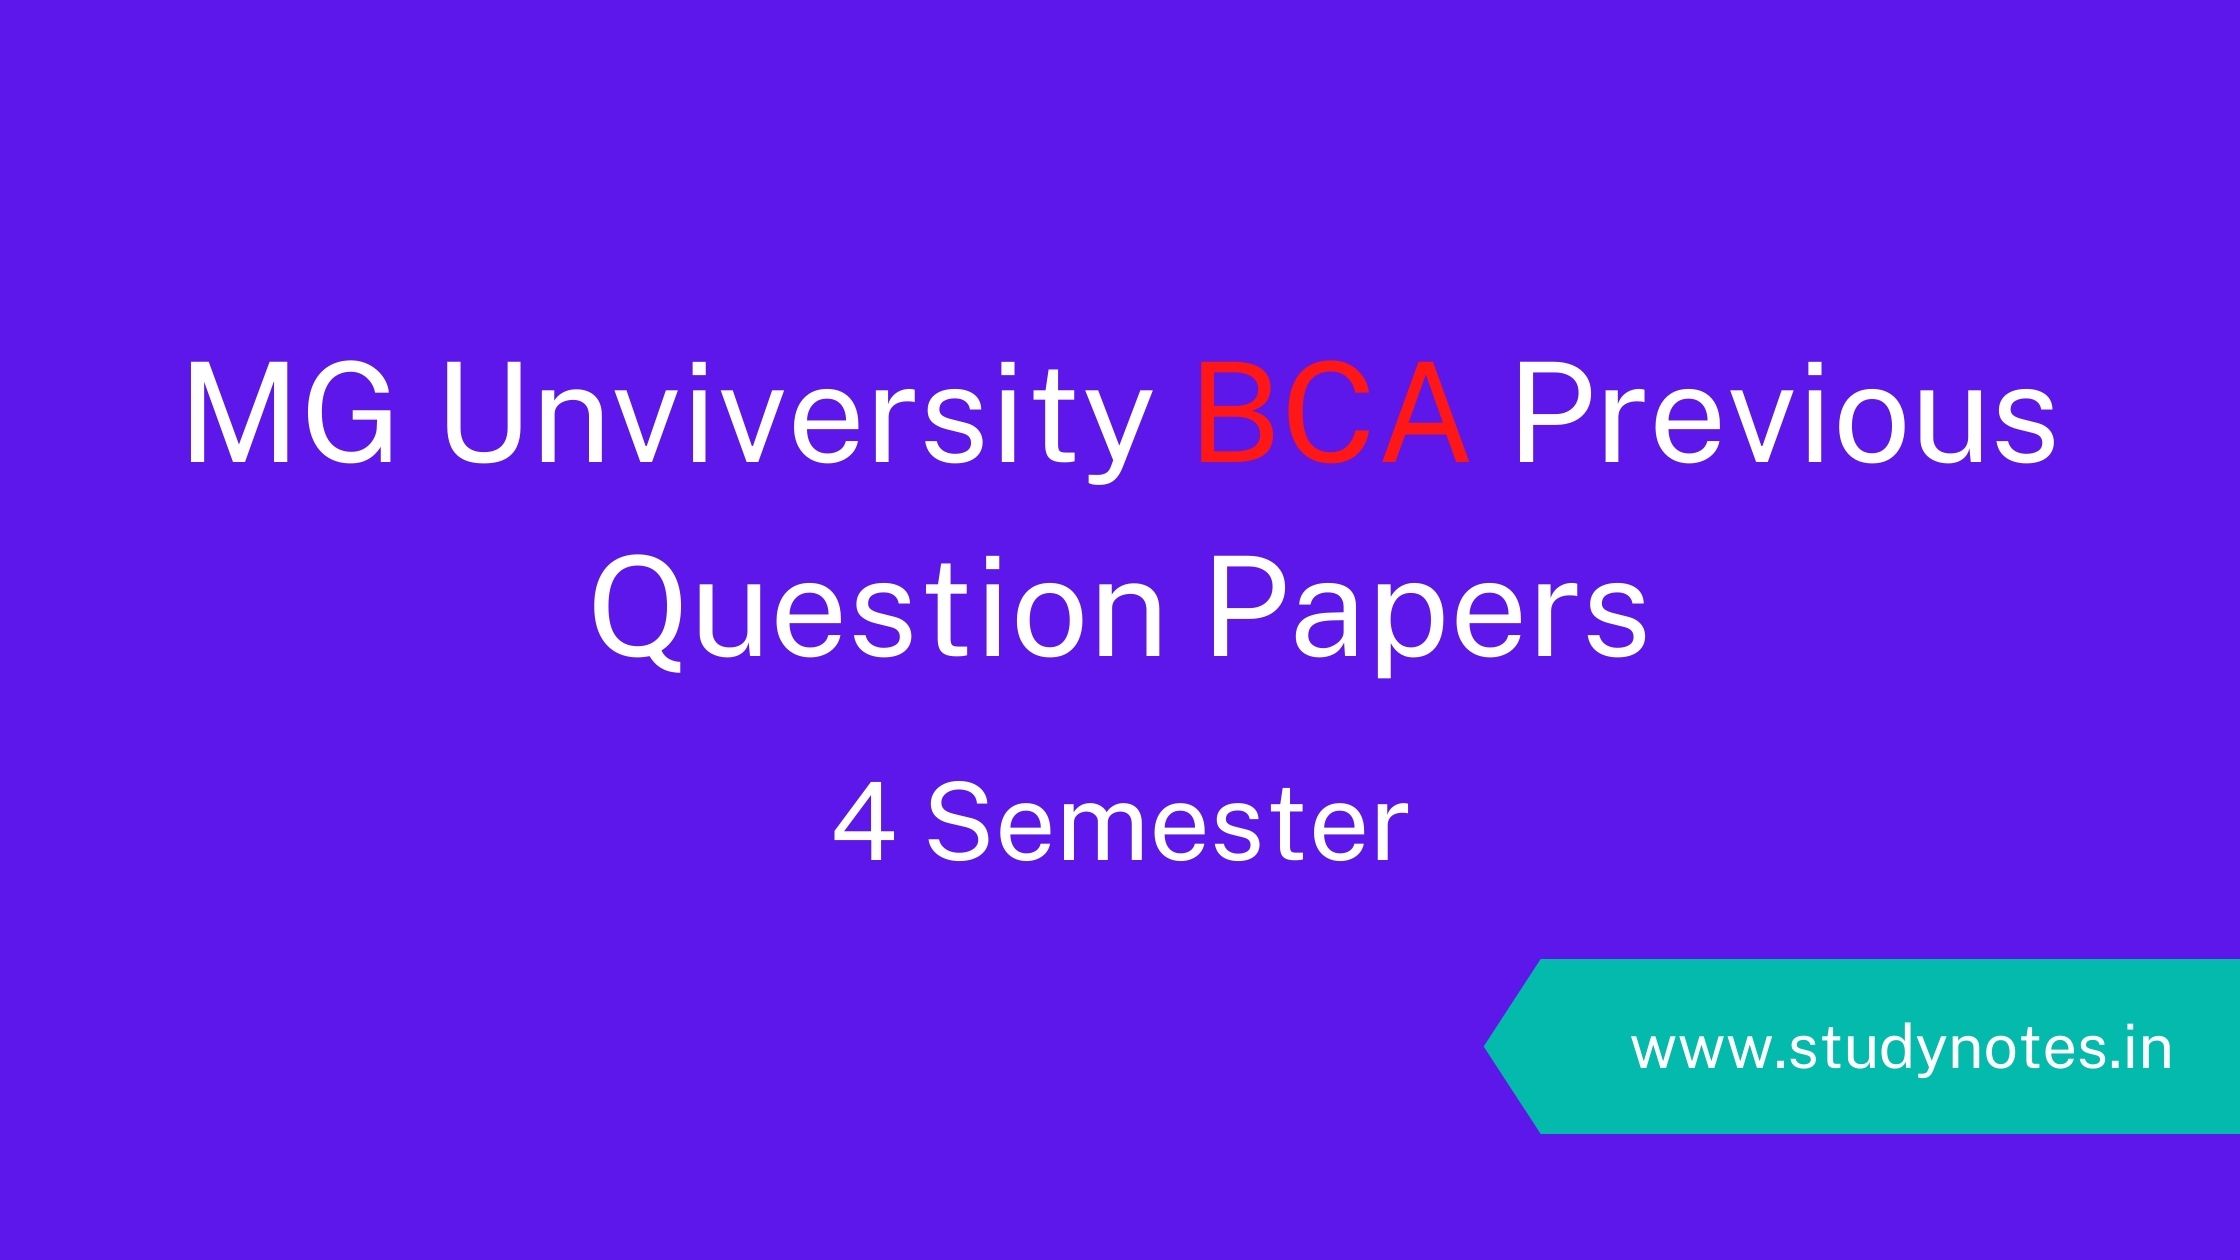 Fourth Semester BCA Previous Question Paper of MG University